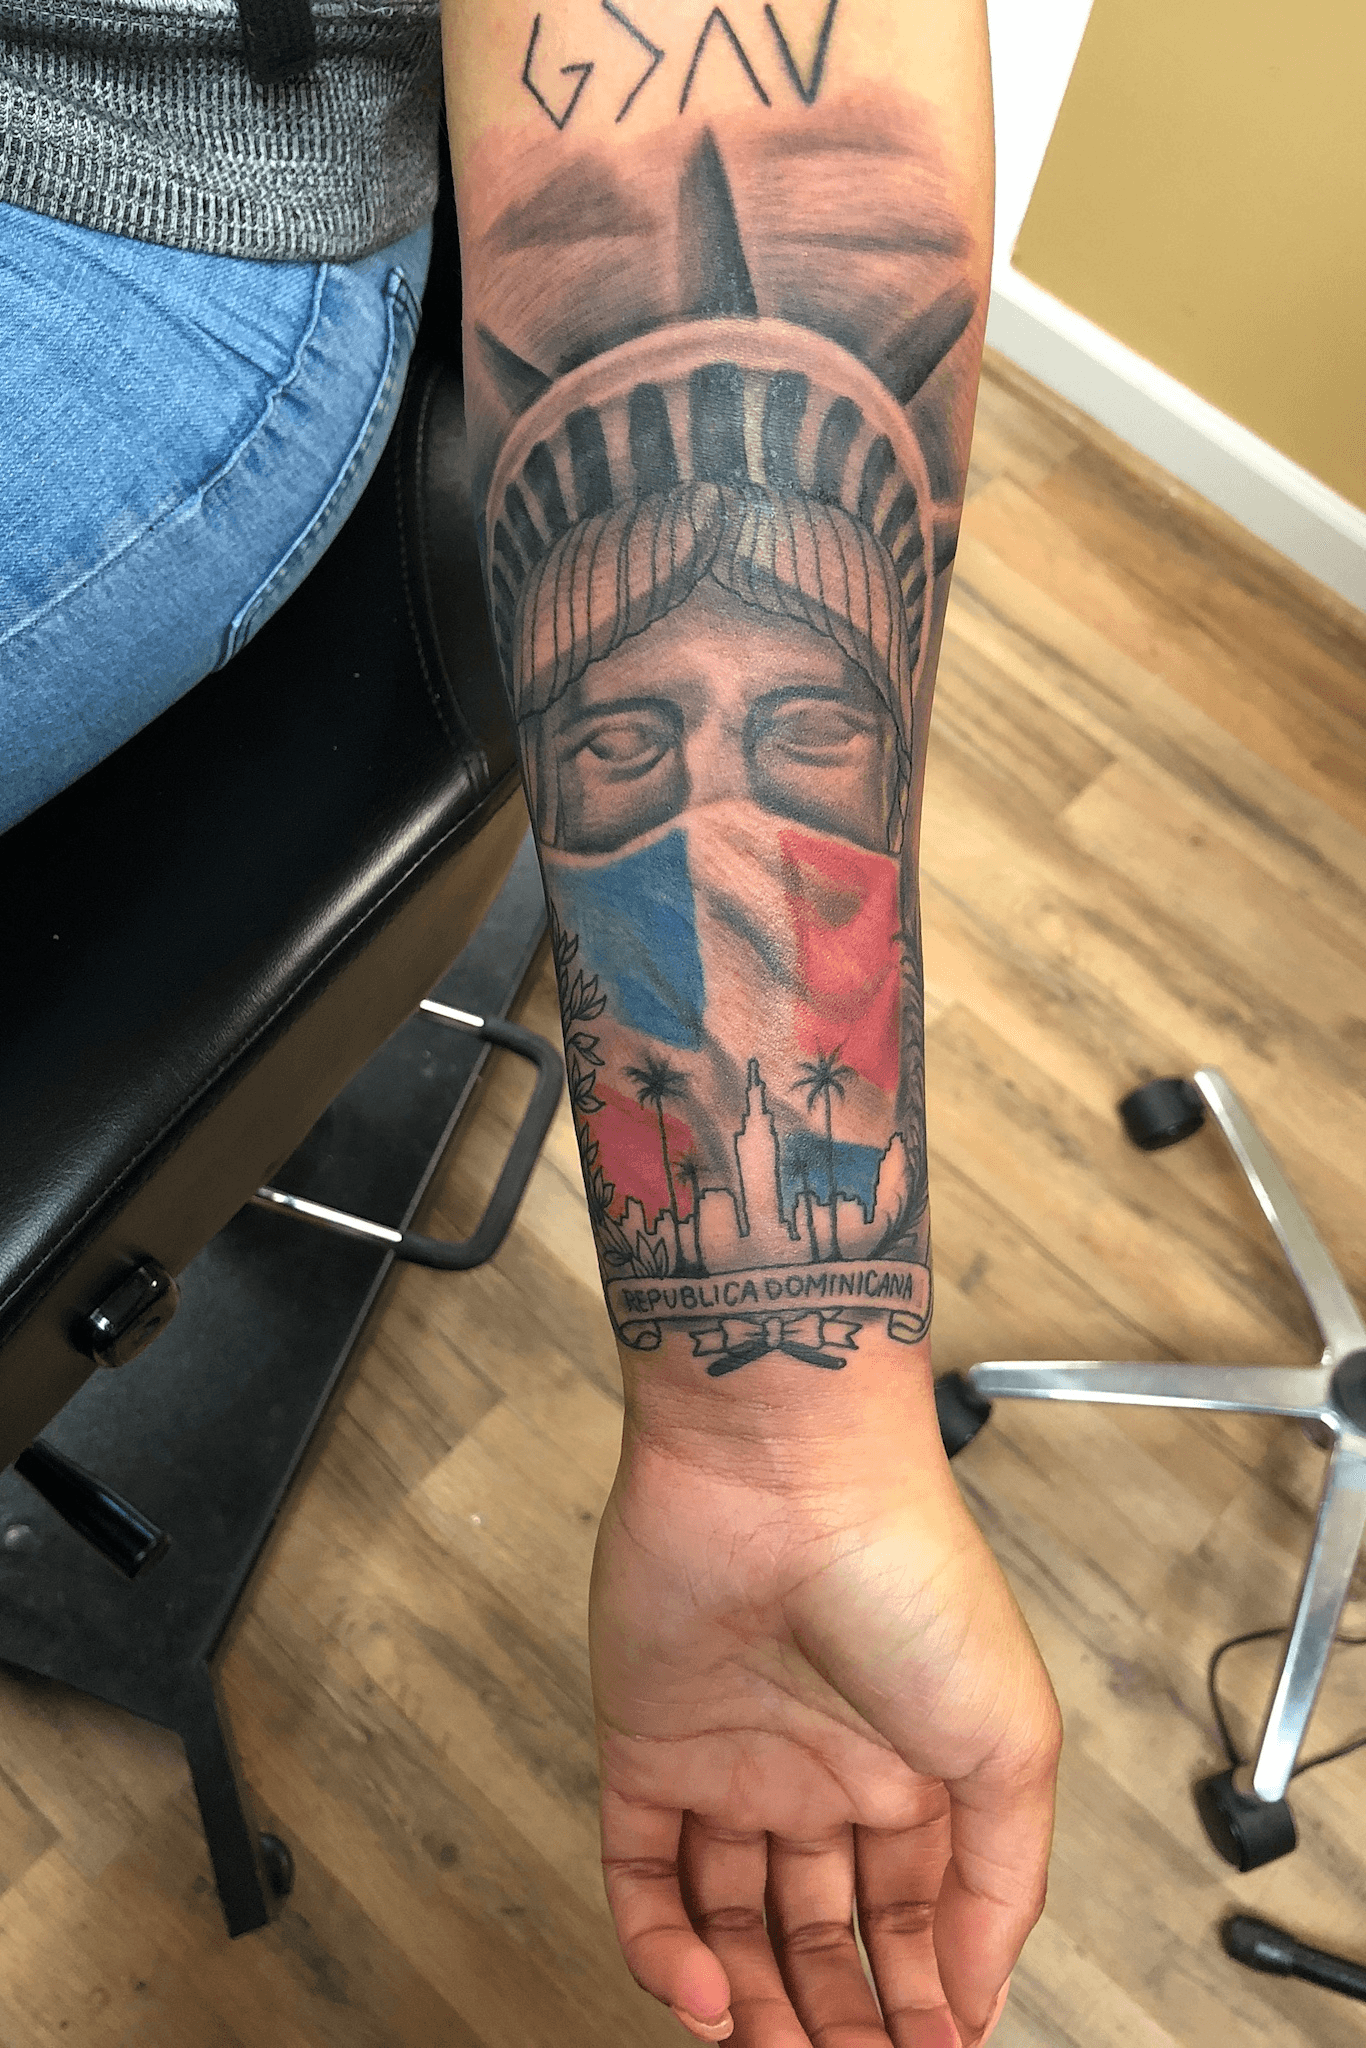 SinCãrã Tatuajes  The Dominican Republic outlined in the color of the flag   ty for looking    tattoos tattooed tatuaje tatt ink  inked inkedgirls girlswithtattoos chicago chicagotattoo  chicagotattooartist chitown 